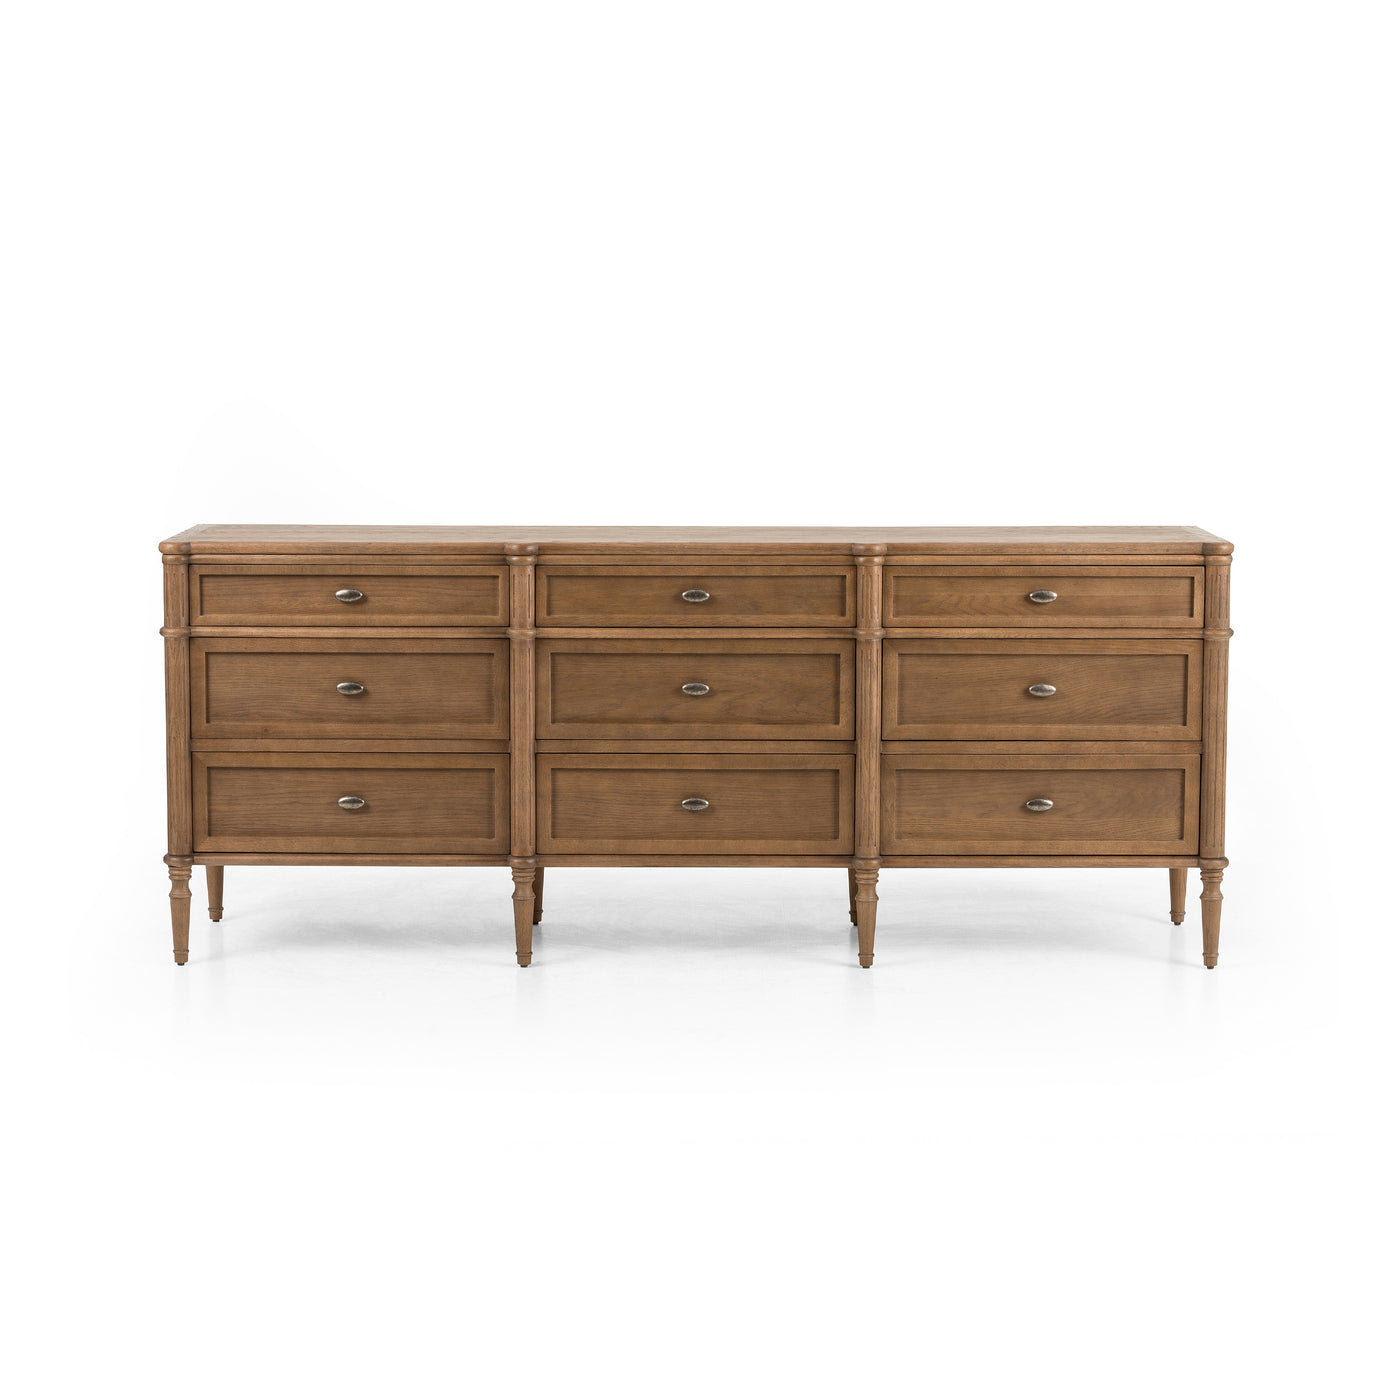 Toulouse 9 Drawer Dresser-Toasted Oak